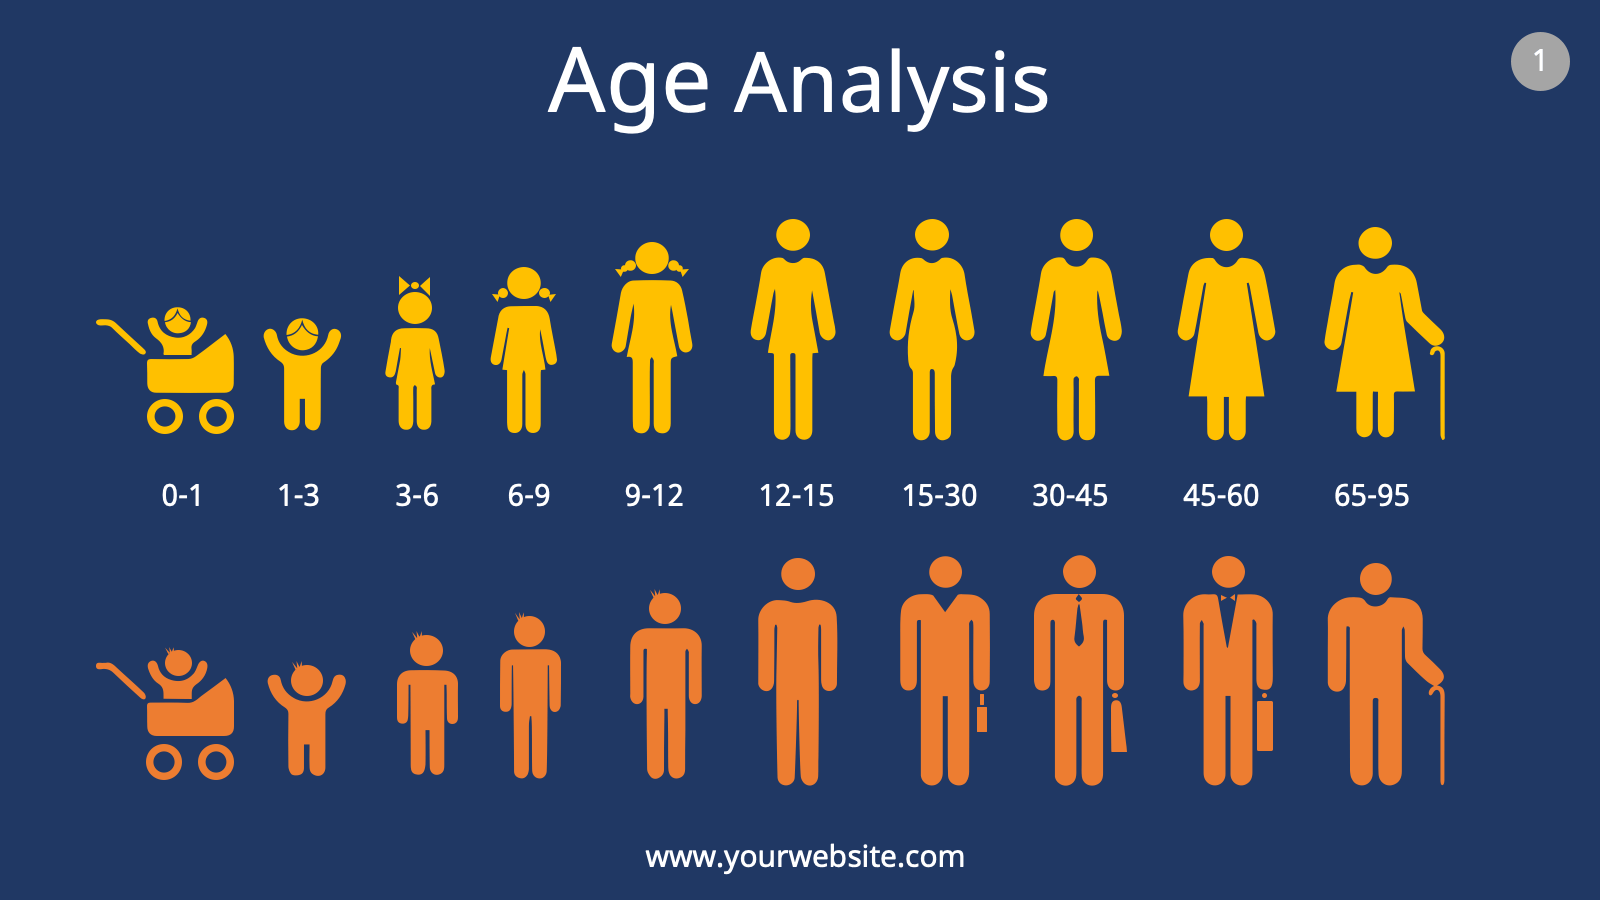 Age Analysis PowerPoint Template Free Download